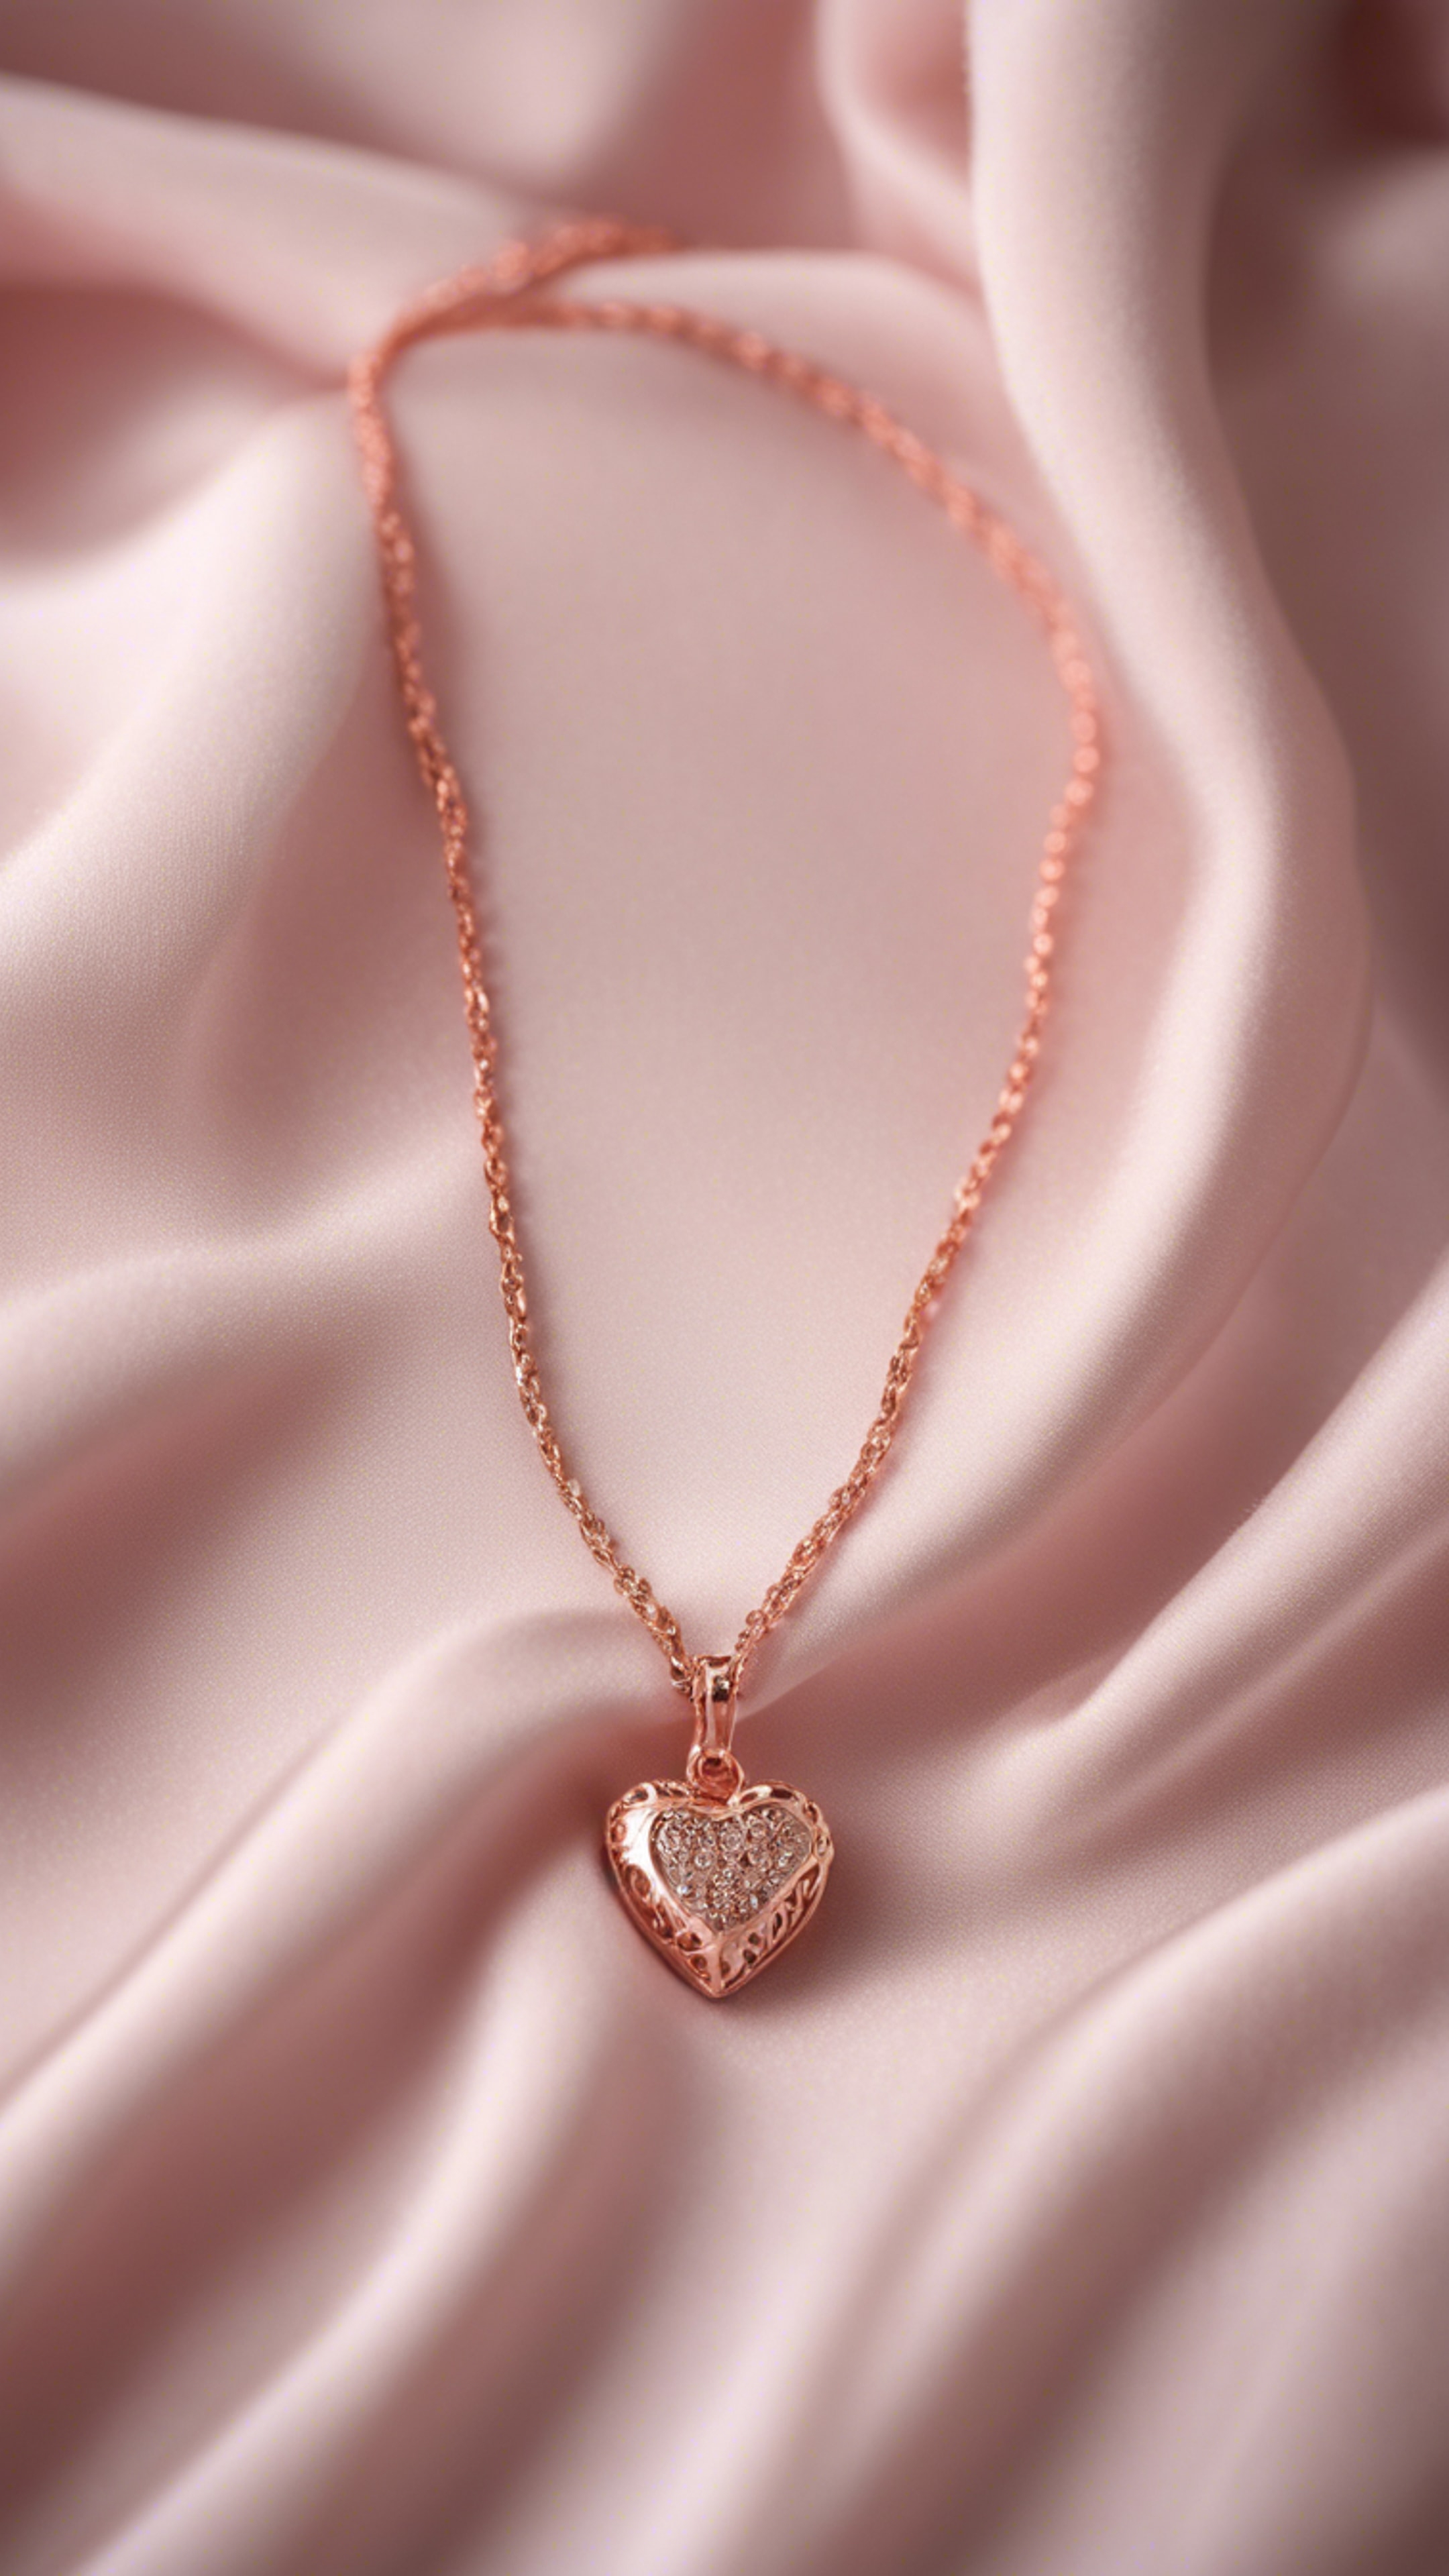 A delicate rose gold chain necklace with a small heart pendant, displayed on a soft pink satin fabric. duvar kağıdı[1bffd5f9a0f0499fae91]